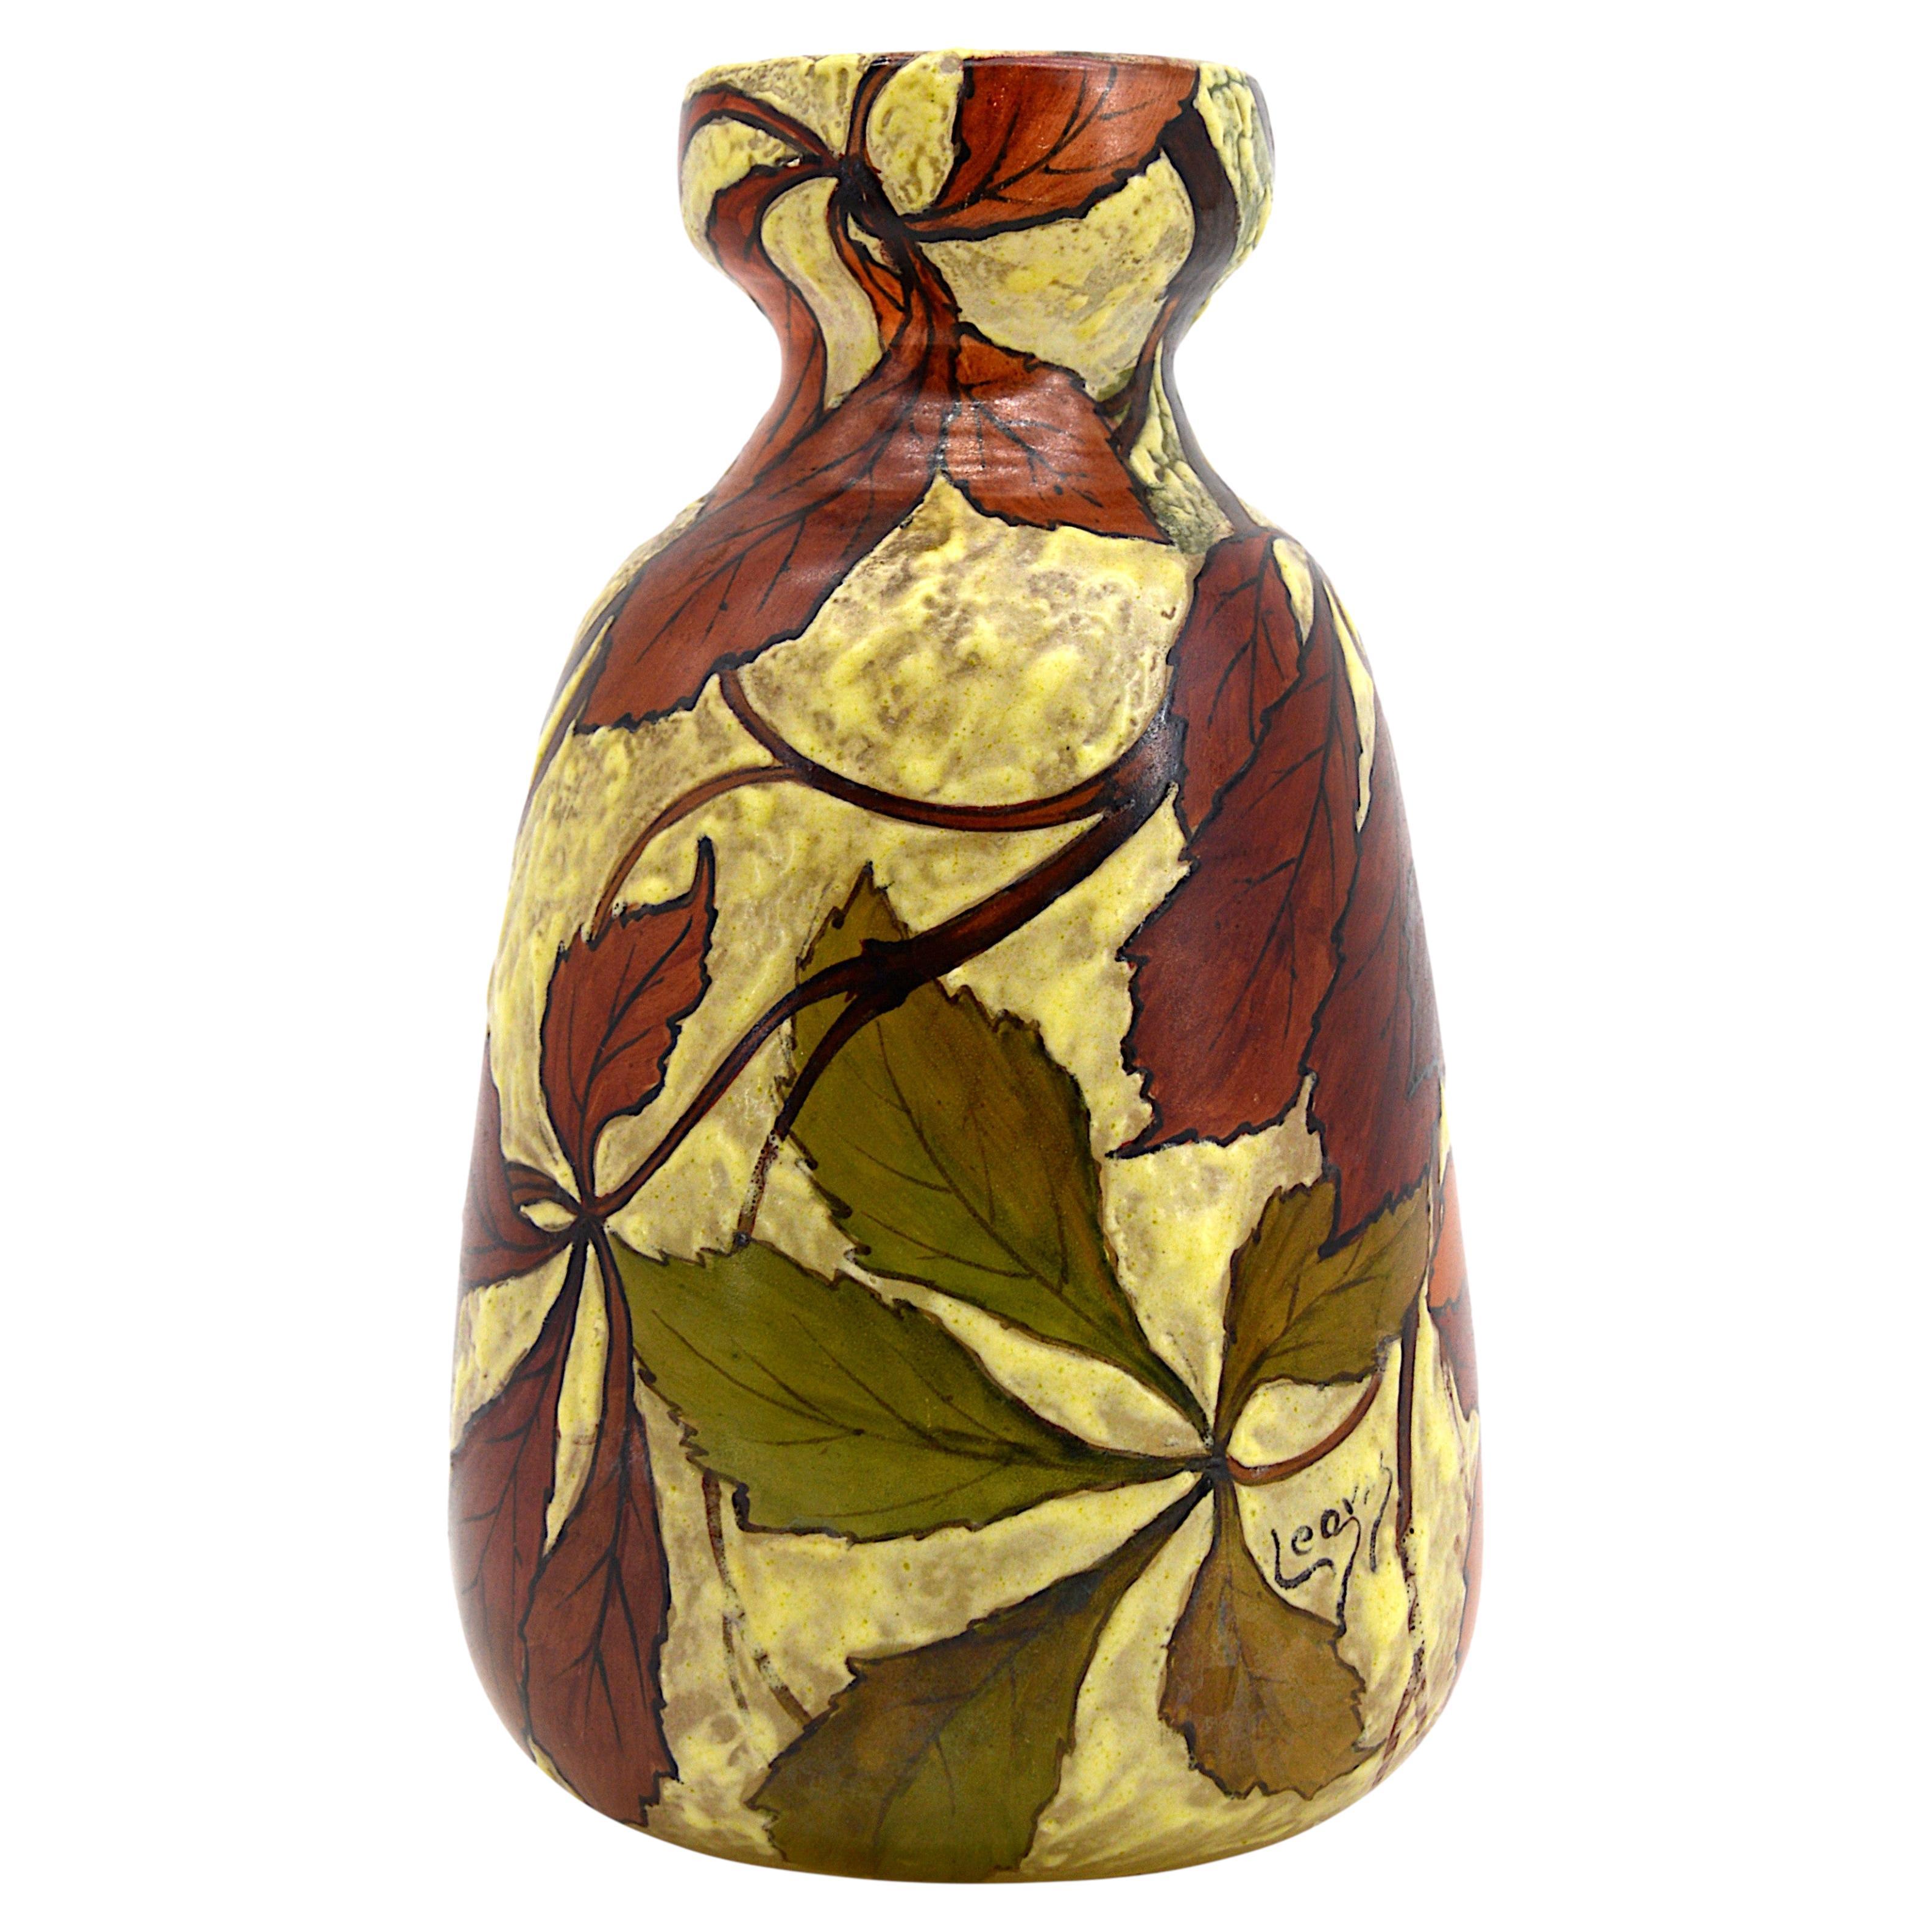 Legras French Art Nouveau Enameled Vase, Early 1900s For Sale